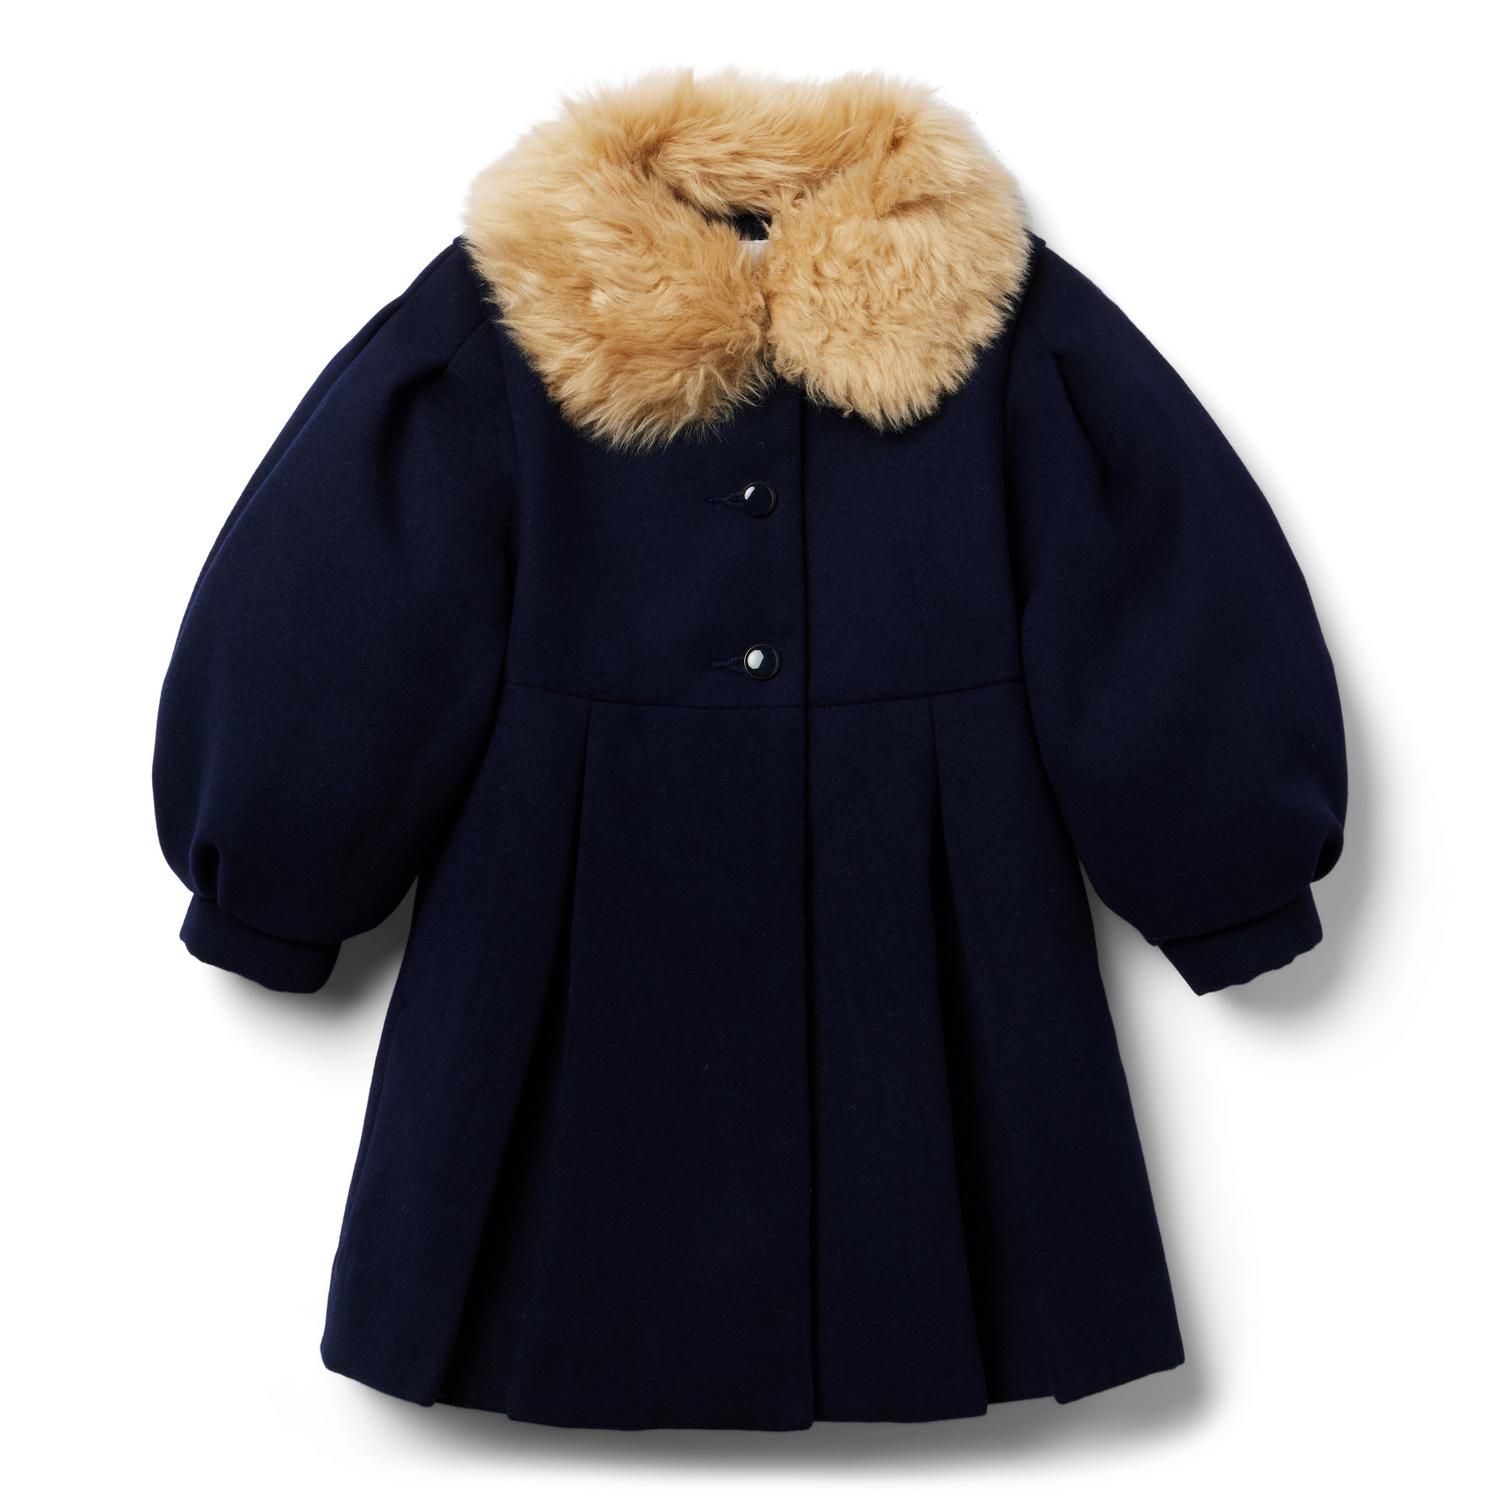 The Classic Holiday Coat | Janie and Jack